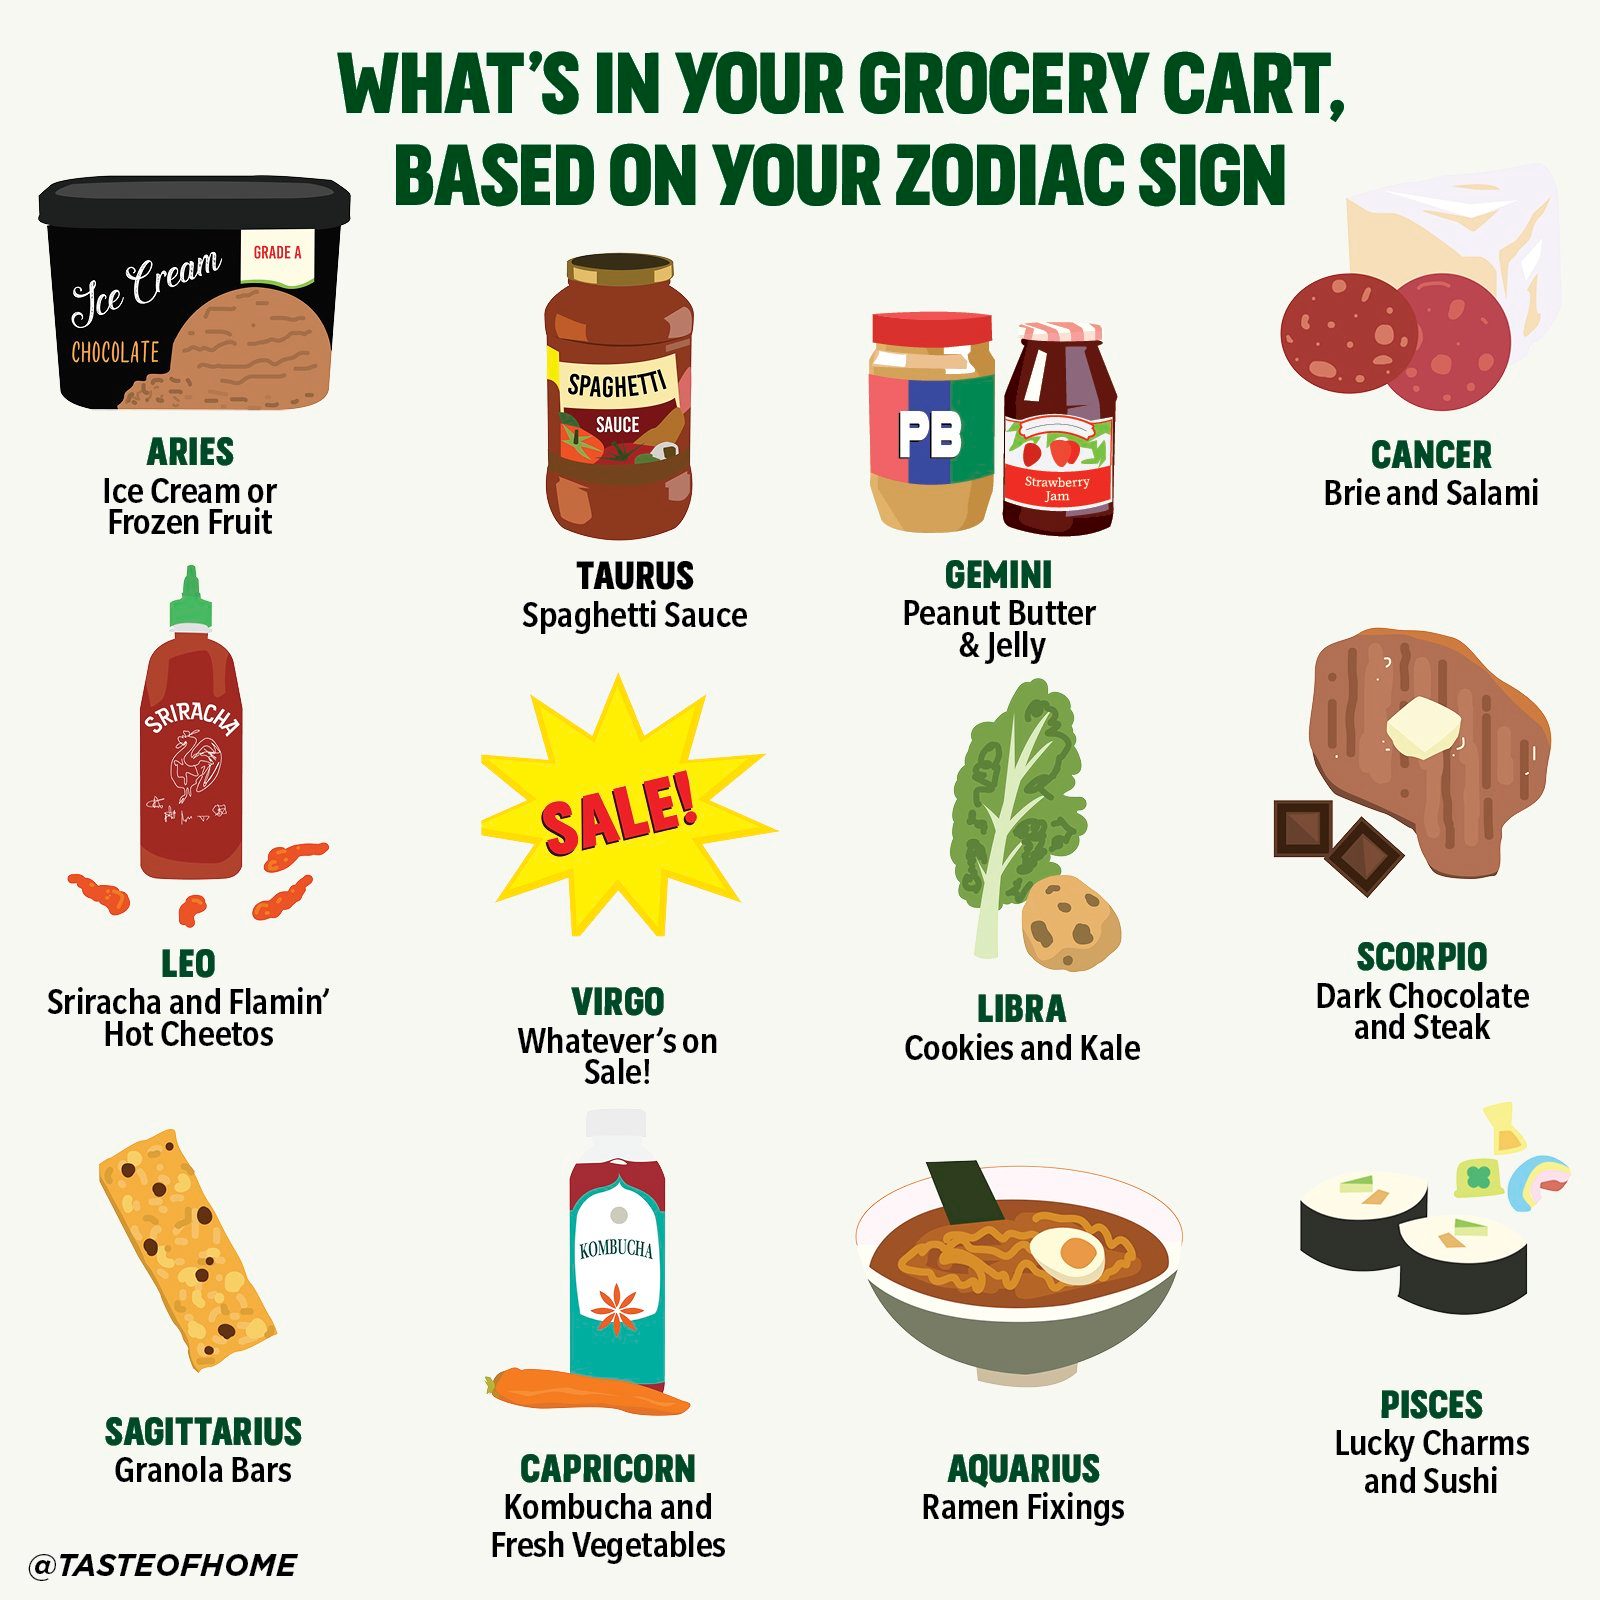 What’s in Your Grocery Cart, Based on Your Zodiac Sign_2